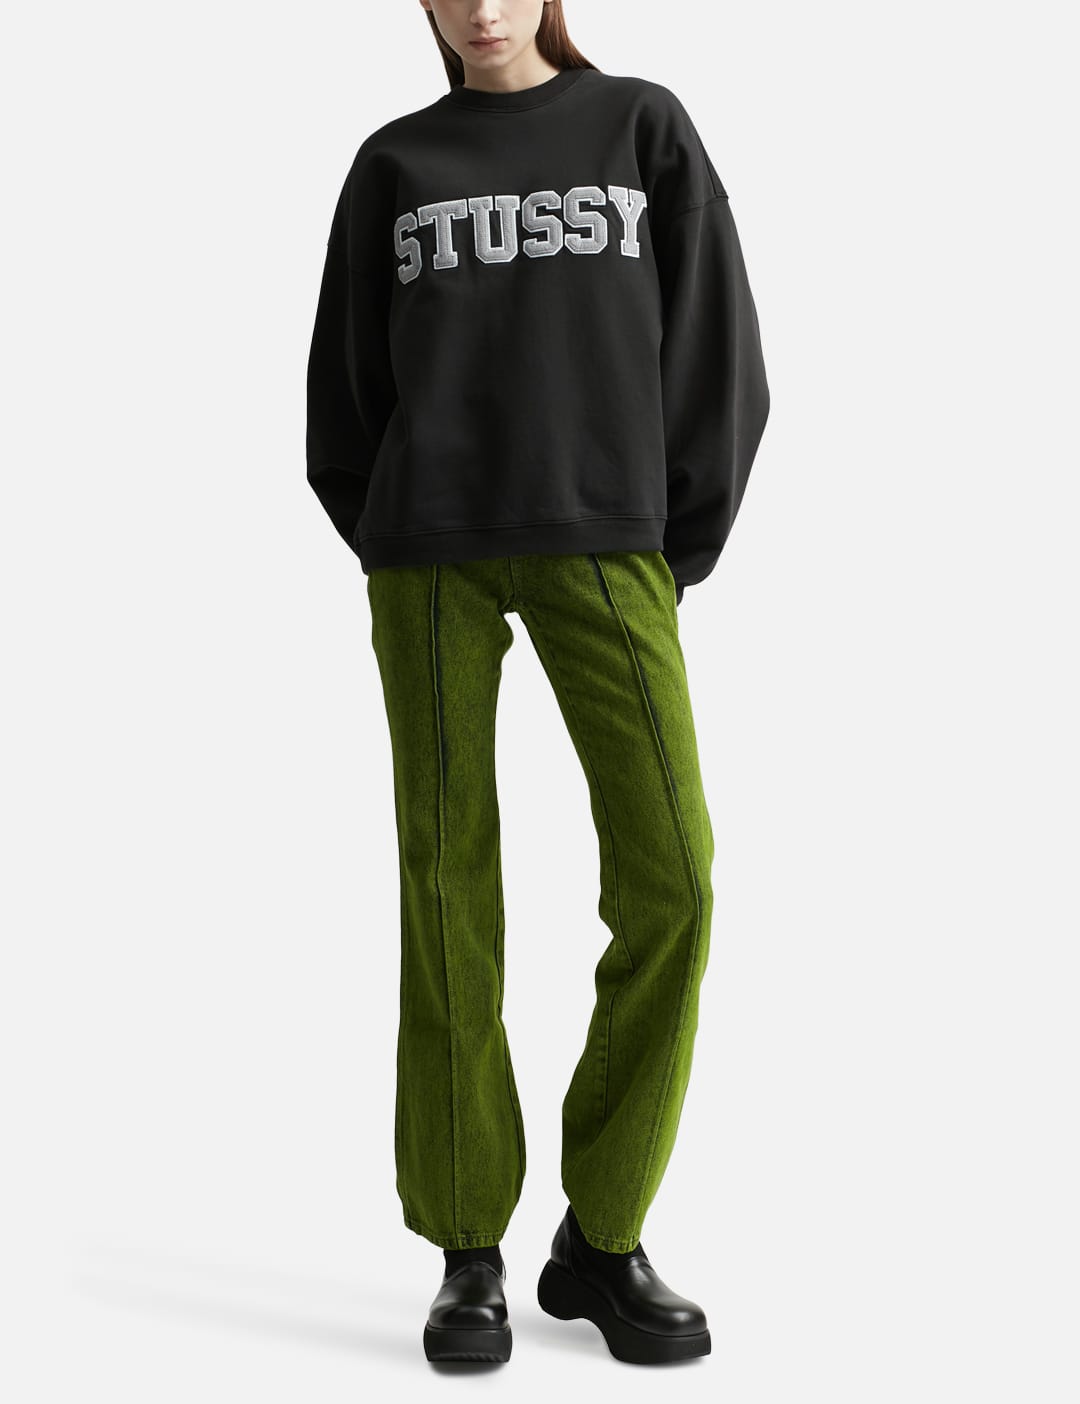 Stüssy - Relaxed Oversized Crewneck | HBX - Globally Curated 